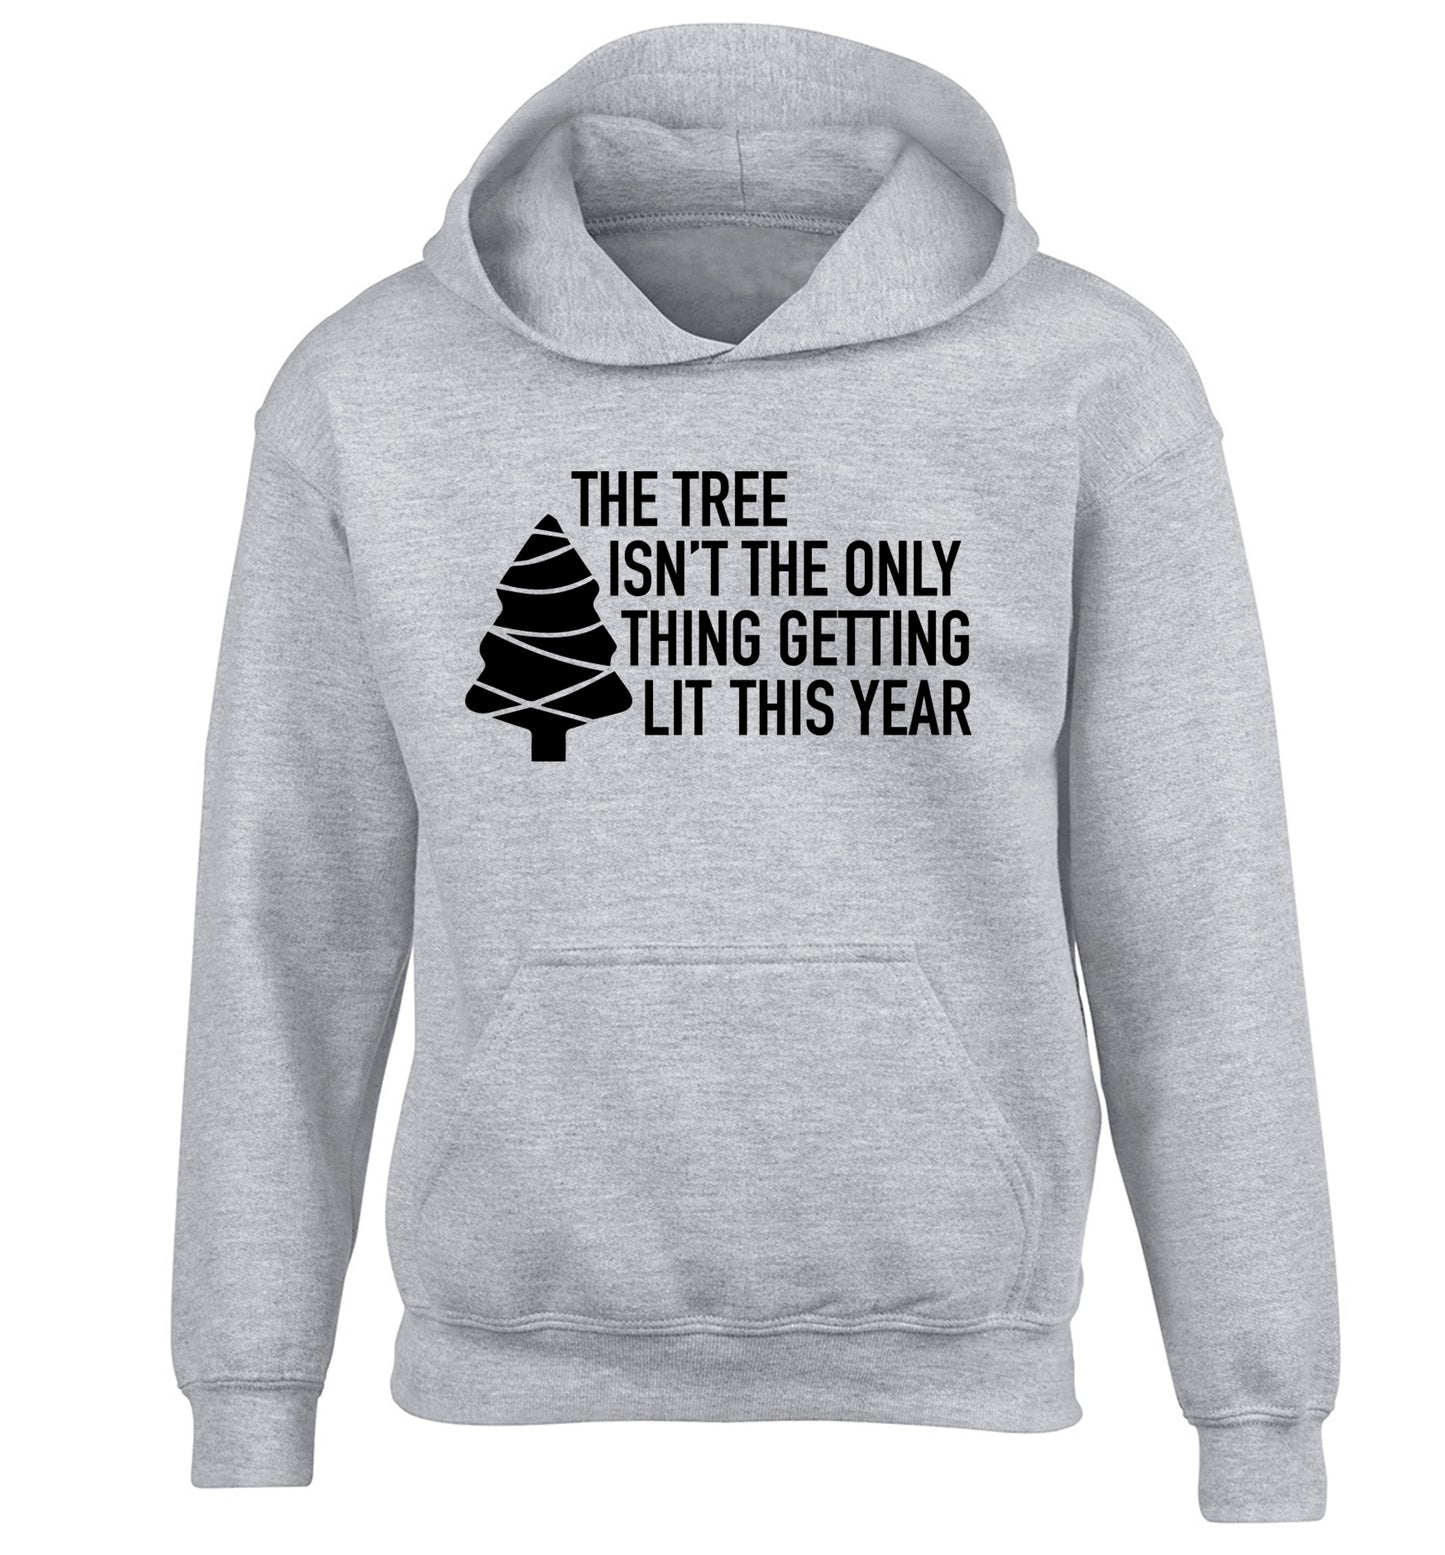 The tree isn't the only thing getting lit this year children's grey hoodie 12-14 Years